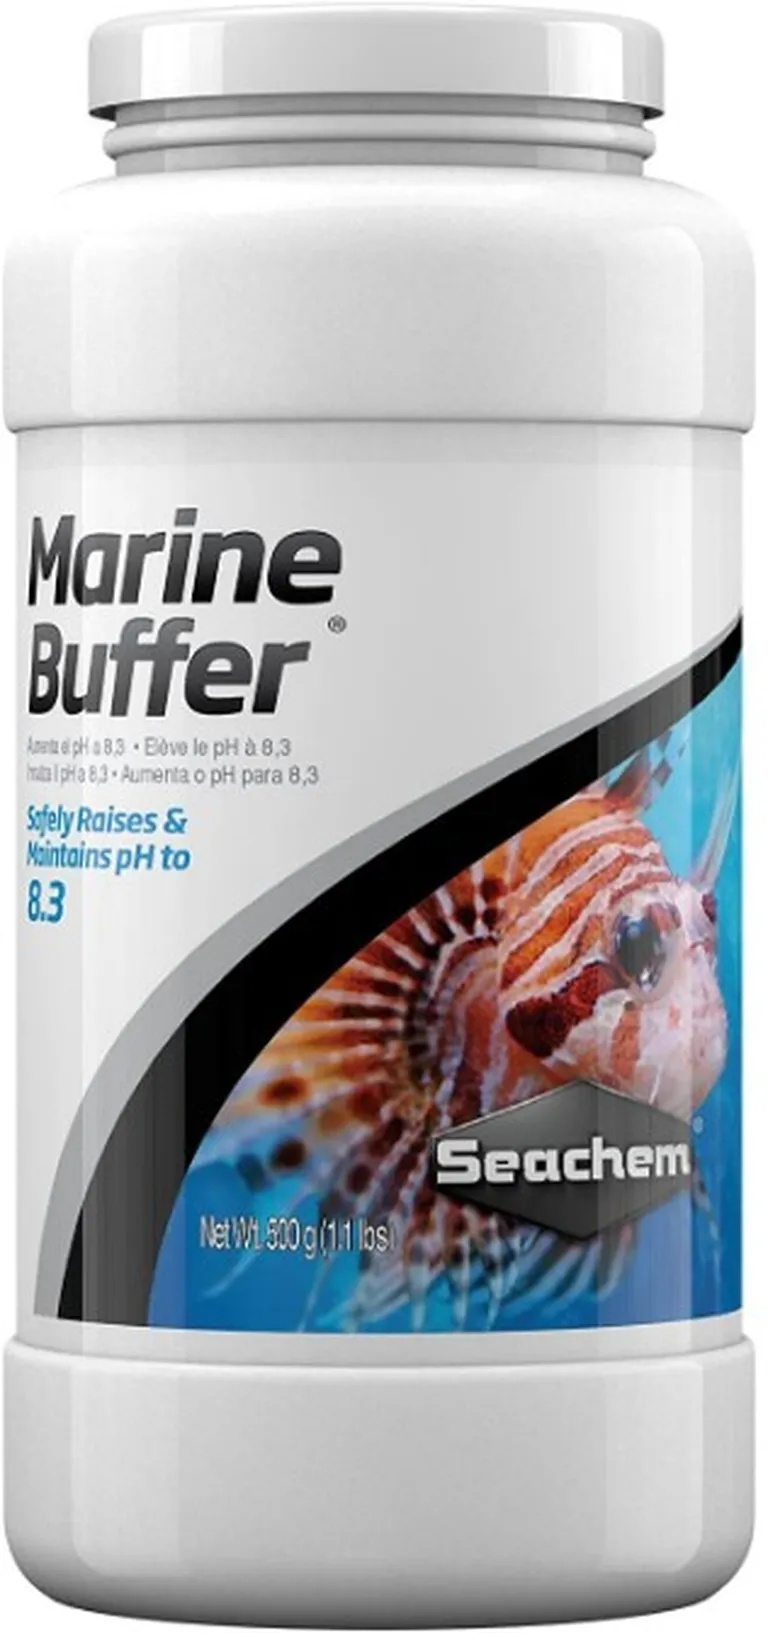 Seachem Marine Buffer Safely Raises and Maintains pH to 8.3 in Aquariums Photo 1